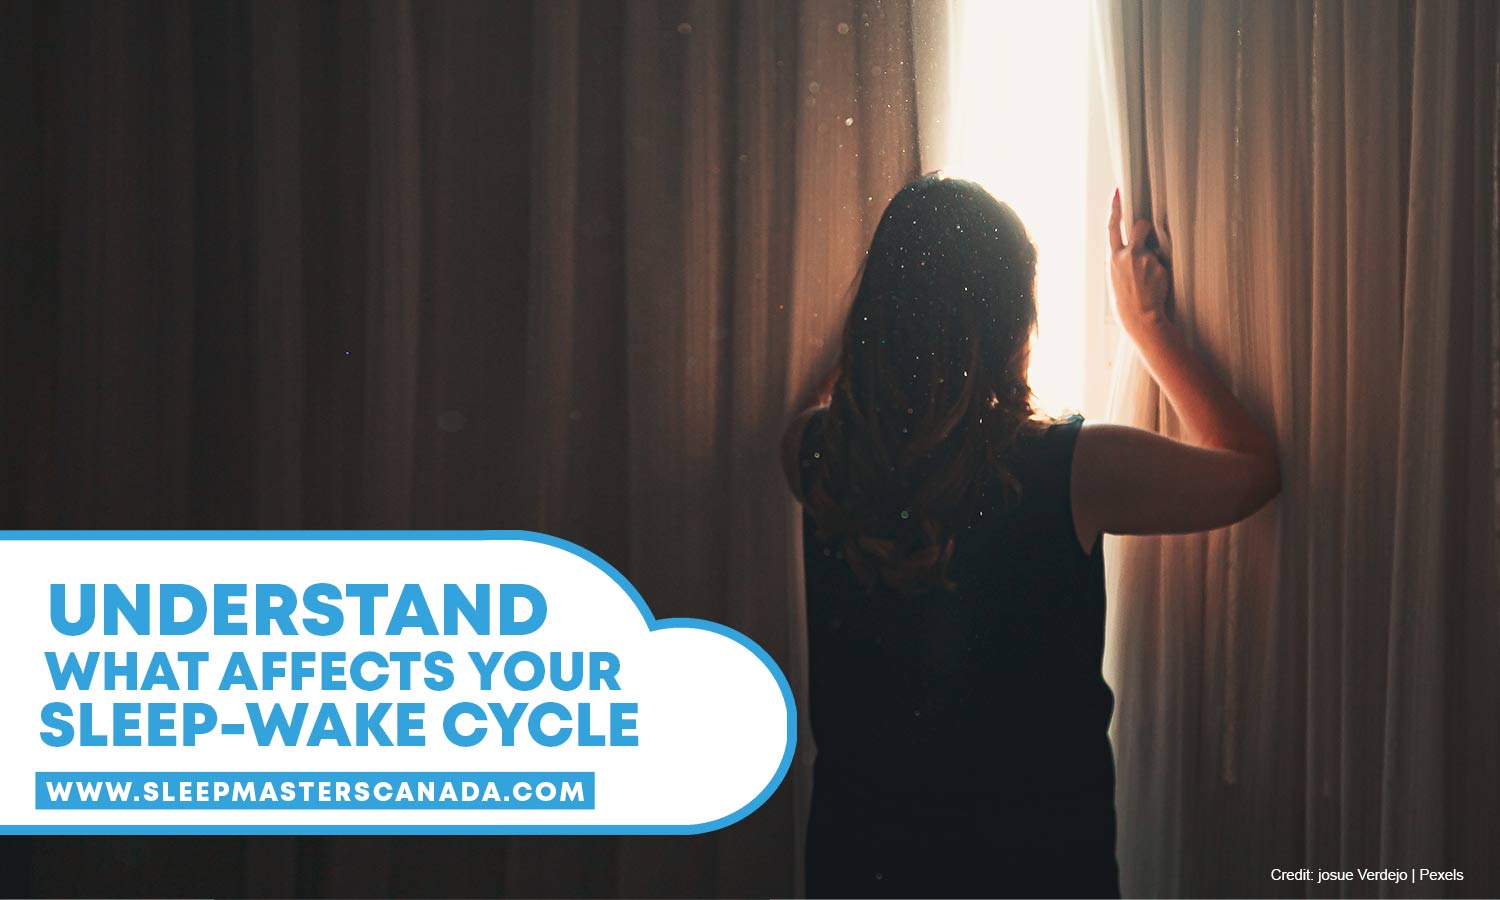 Understand what affects your sleep-wake cycle